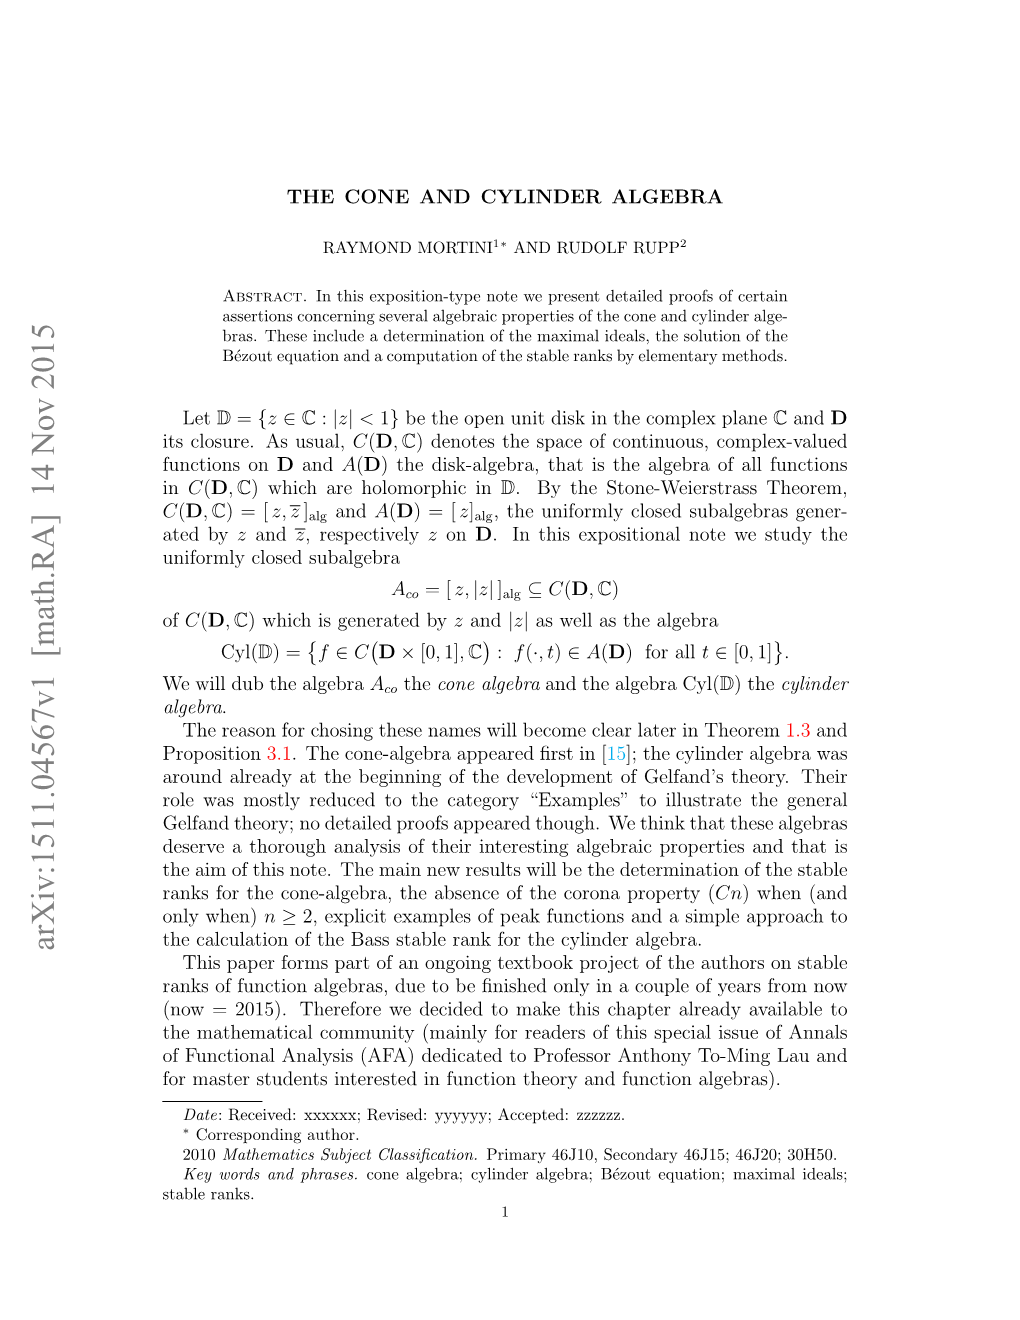 The Cone and Cylinder Algebra